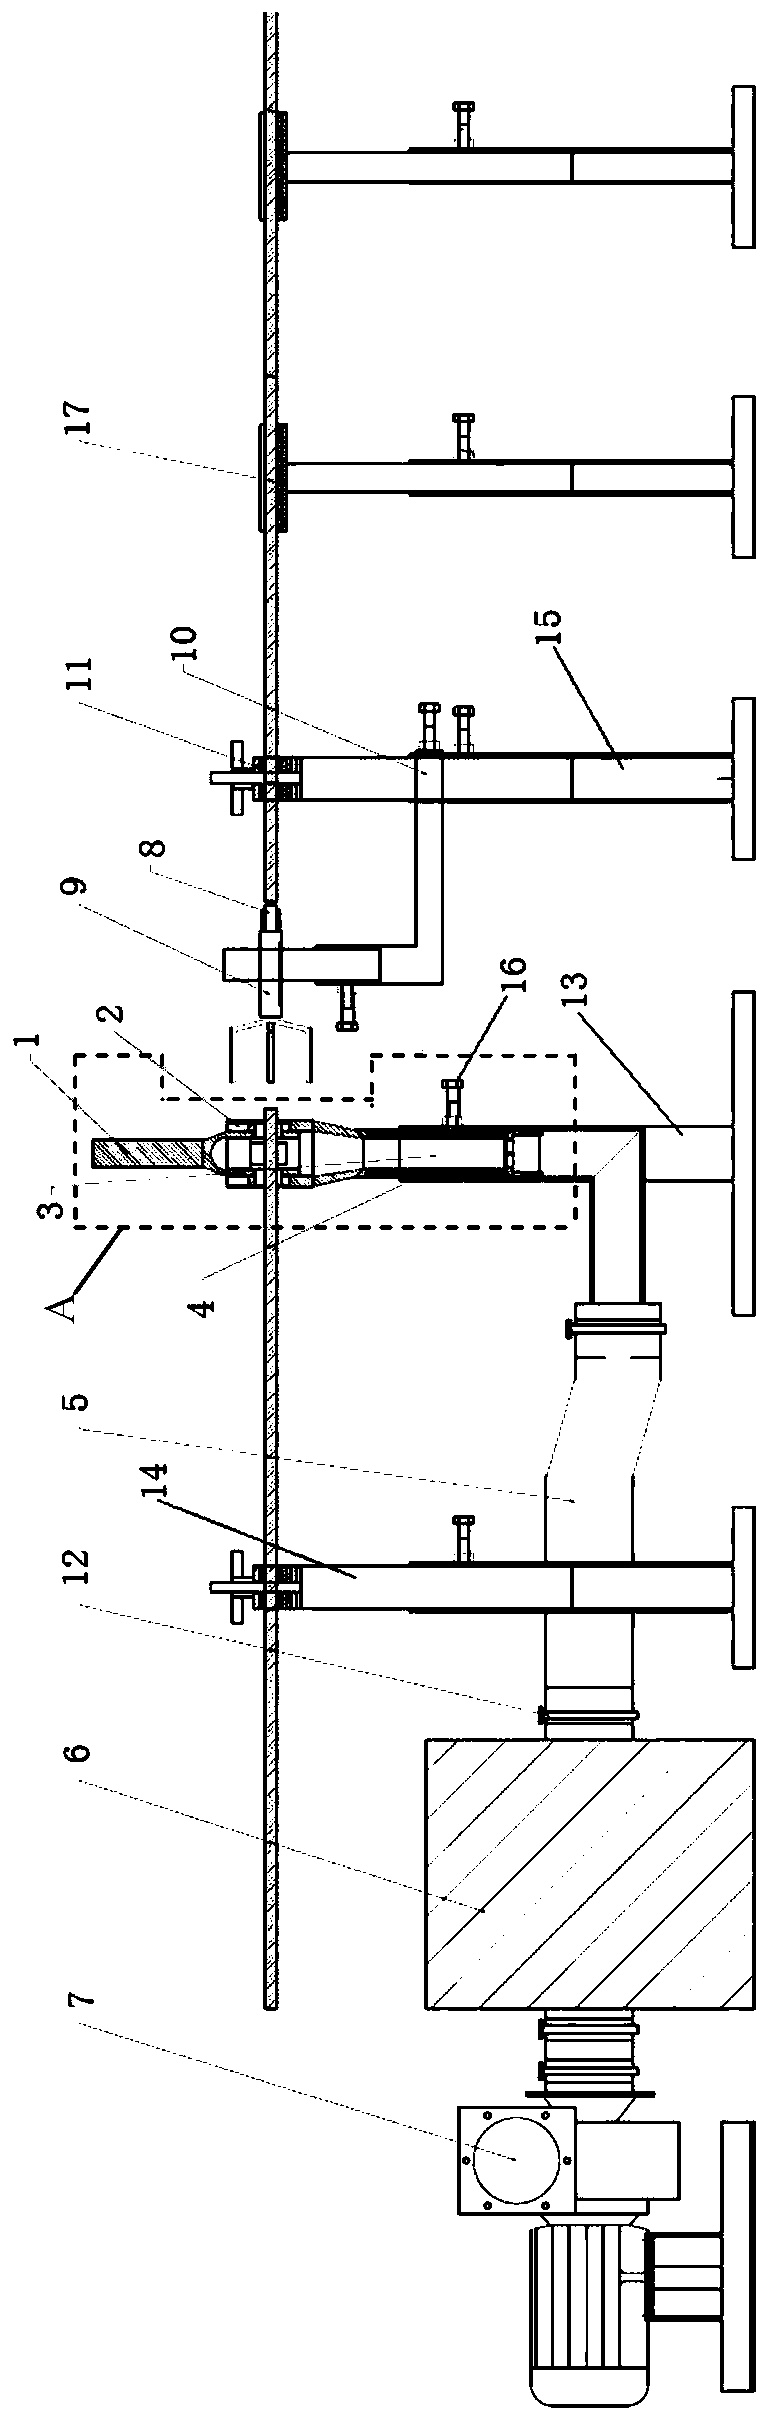 Device and method for cutting spent fuel rods